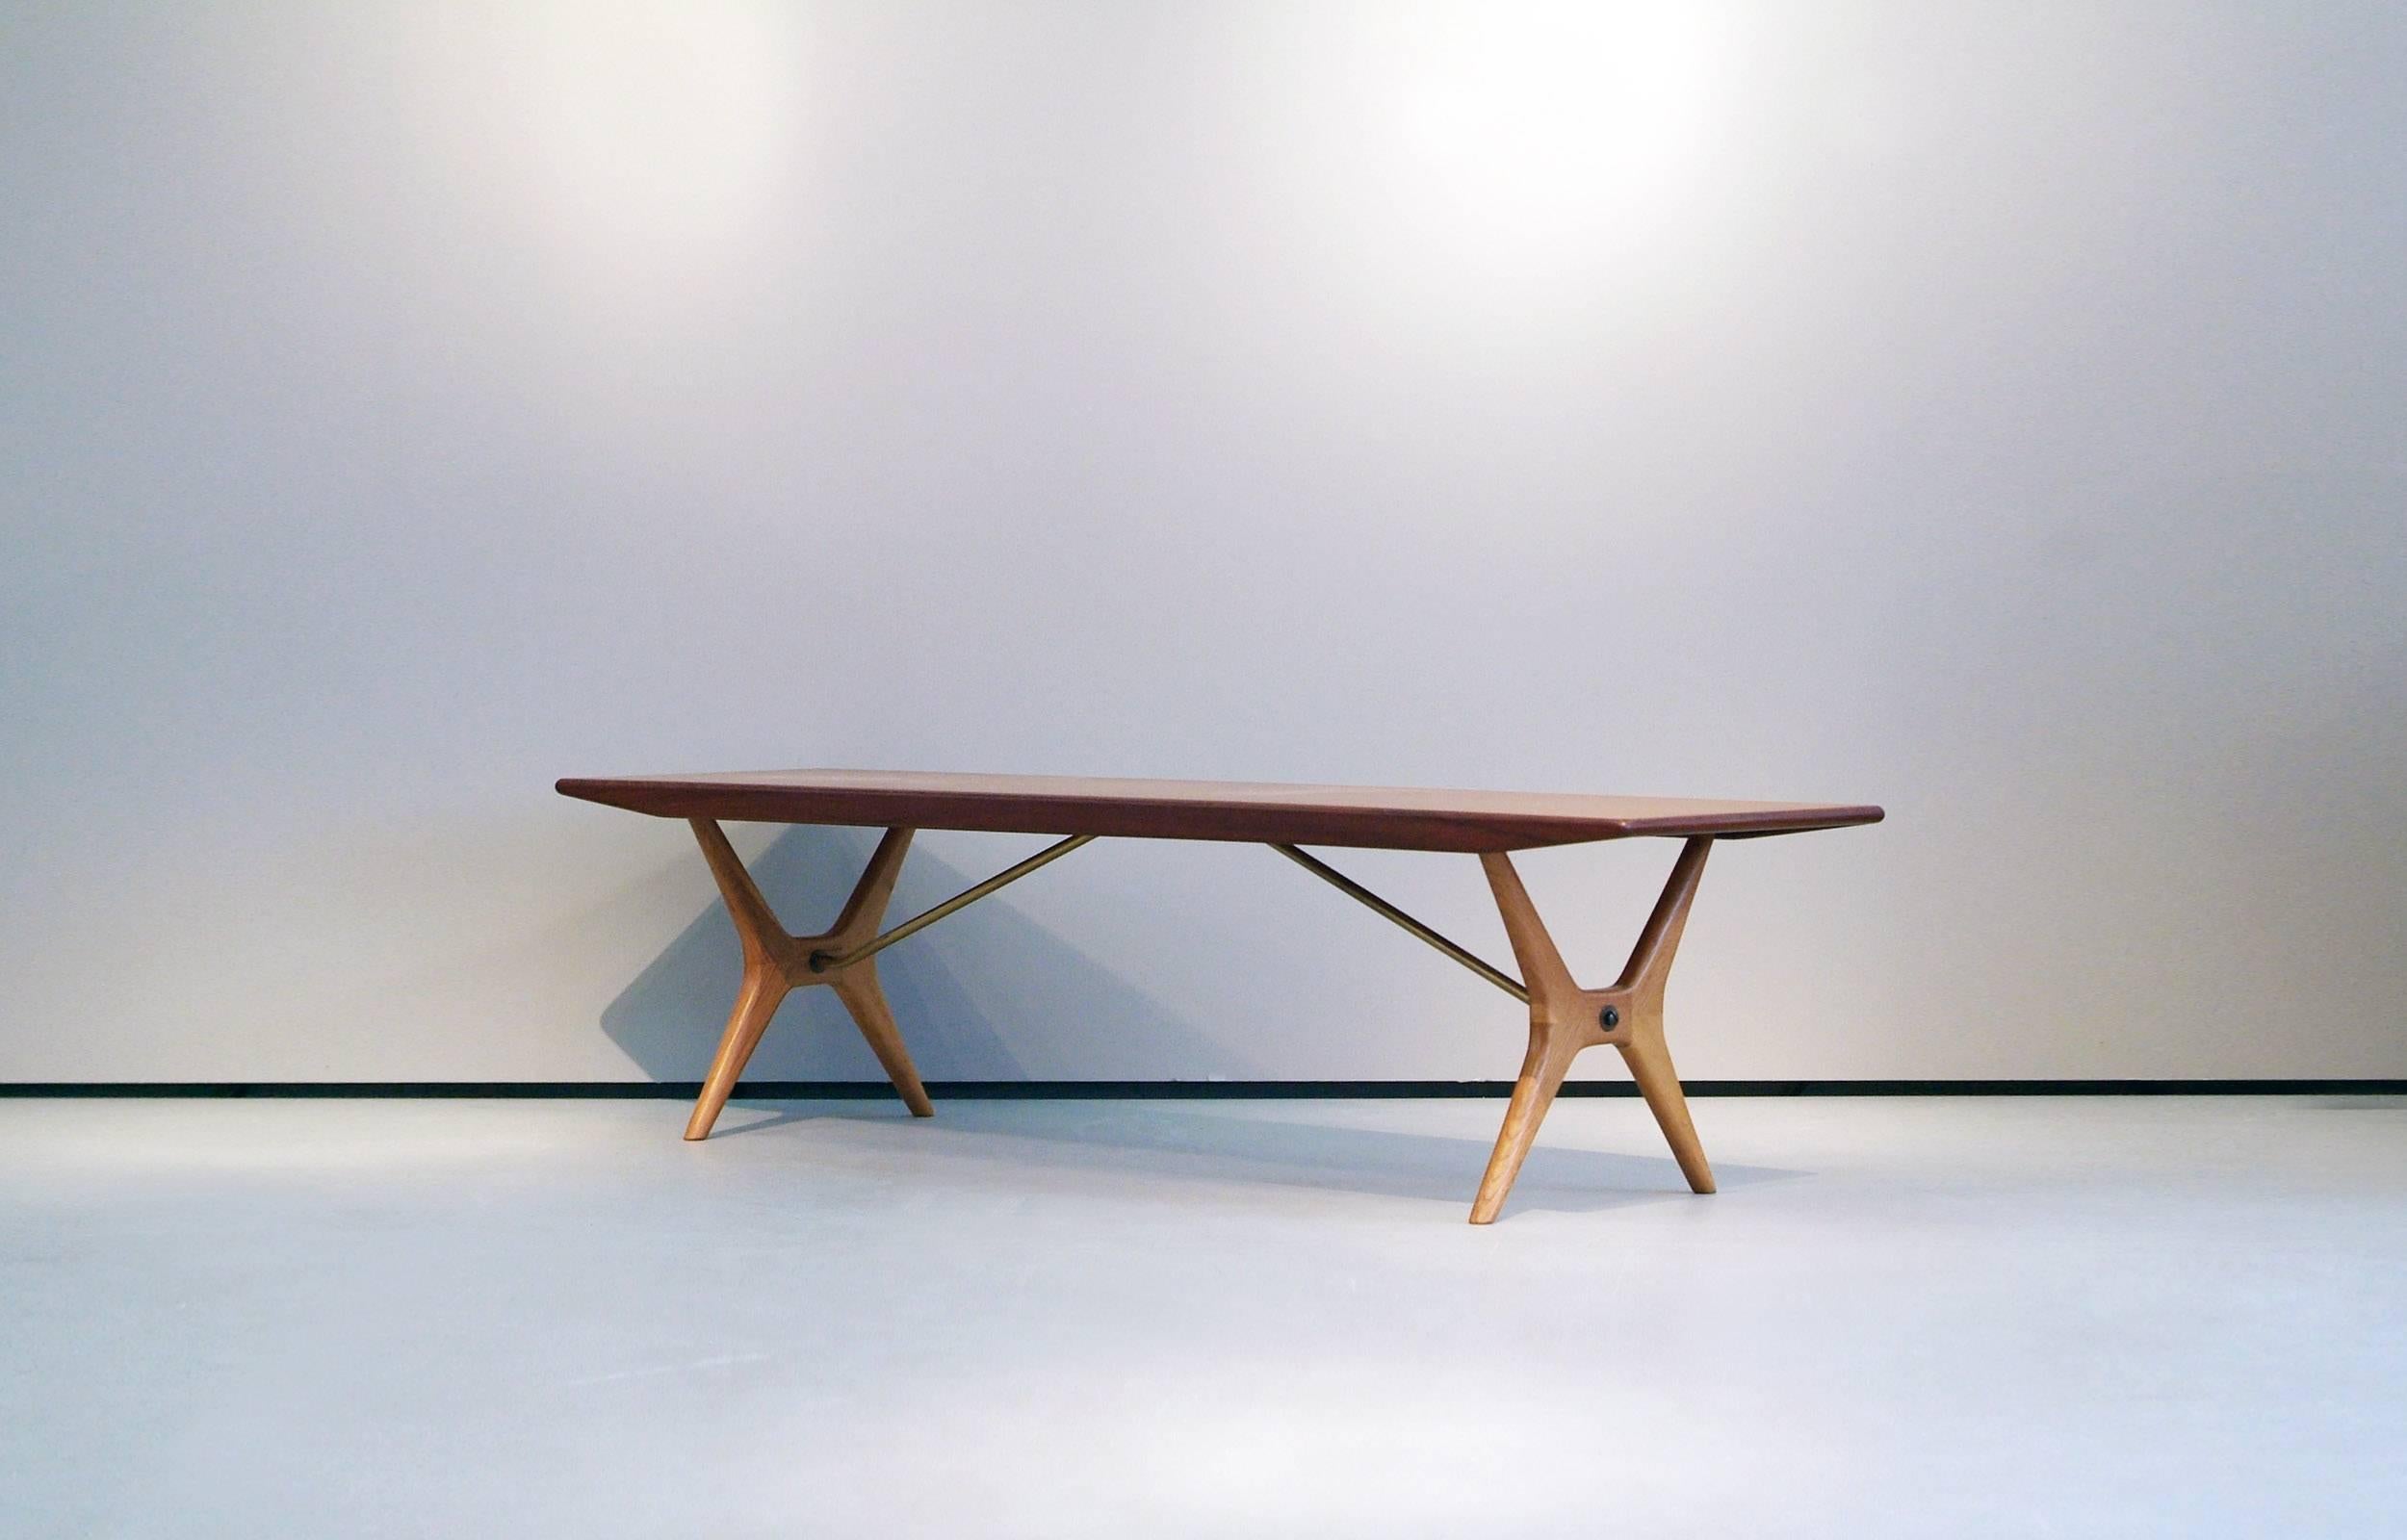 Rare Karl-Erik Ekselius bench made by JOC (J O Carlsson) in Sweden in the 1950s. Teak top and oak base with wonderful brass fittings.

Perfect, restored condition with minor wear consistent with age and use.
 